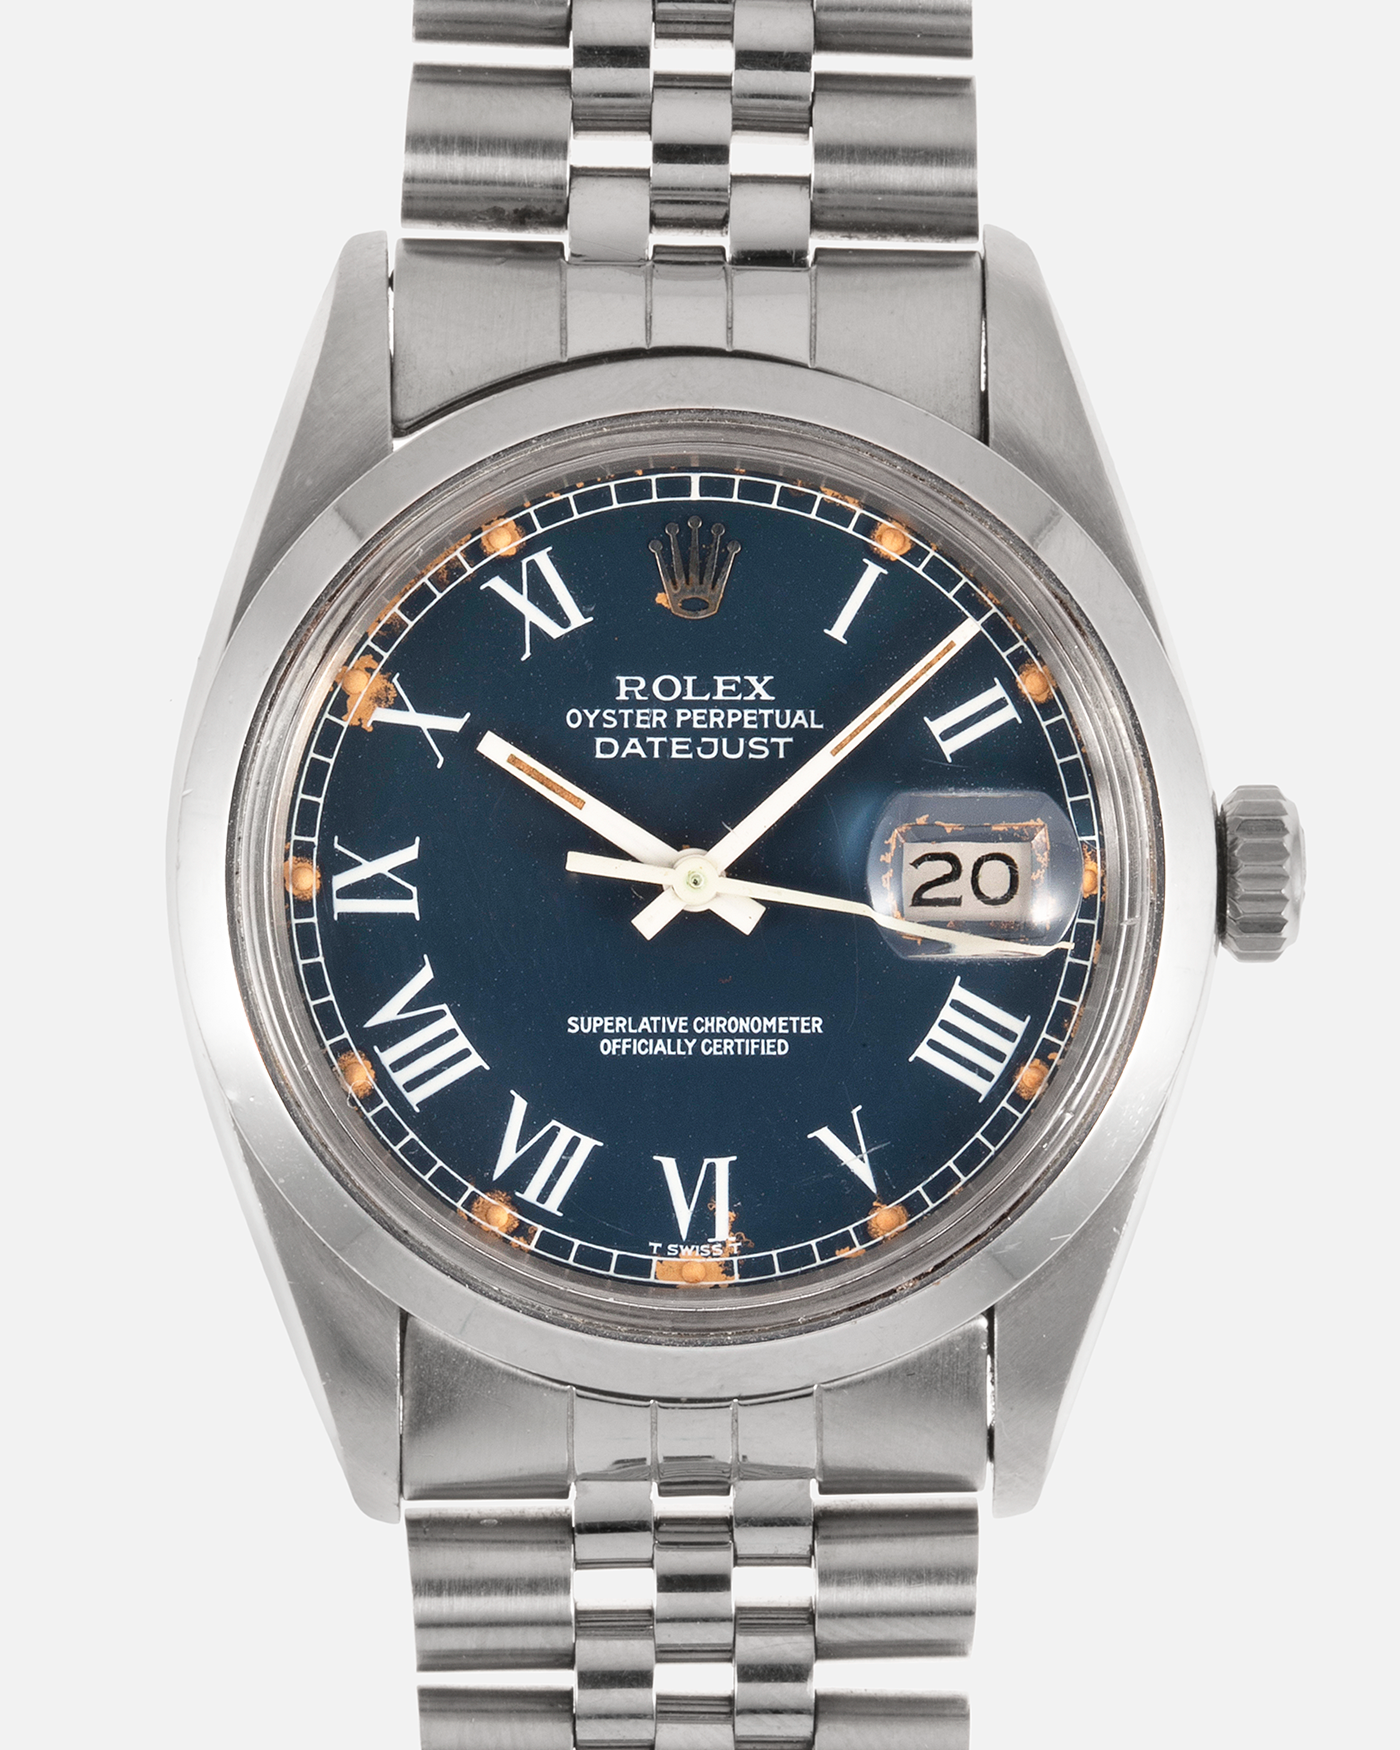 Brand: Rolex Year: 1980 Model: Datejust Reference Number: 16000 Serial Number: 60XXXXX Material: Stainless Steel Movement: Cal. 3035, Self-Winding Case Diameter: 36mm Lug Width: 20mm Bracelet/Strap: Rolex Stainless Steel 62510 Bracelet with 555 End Links